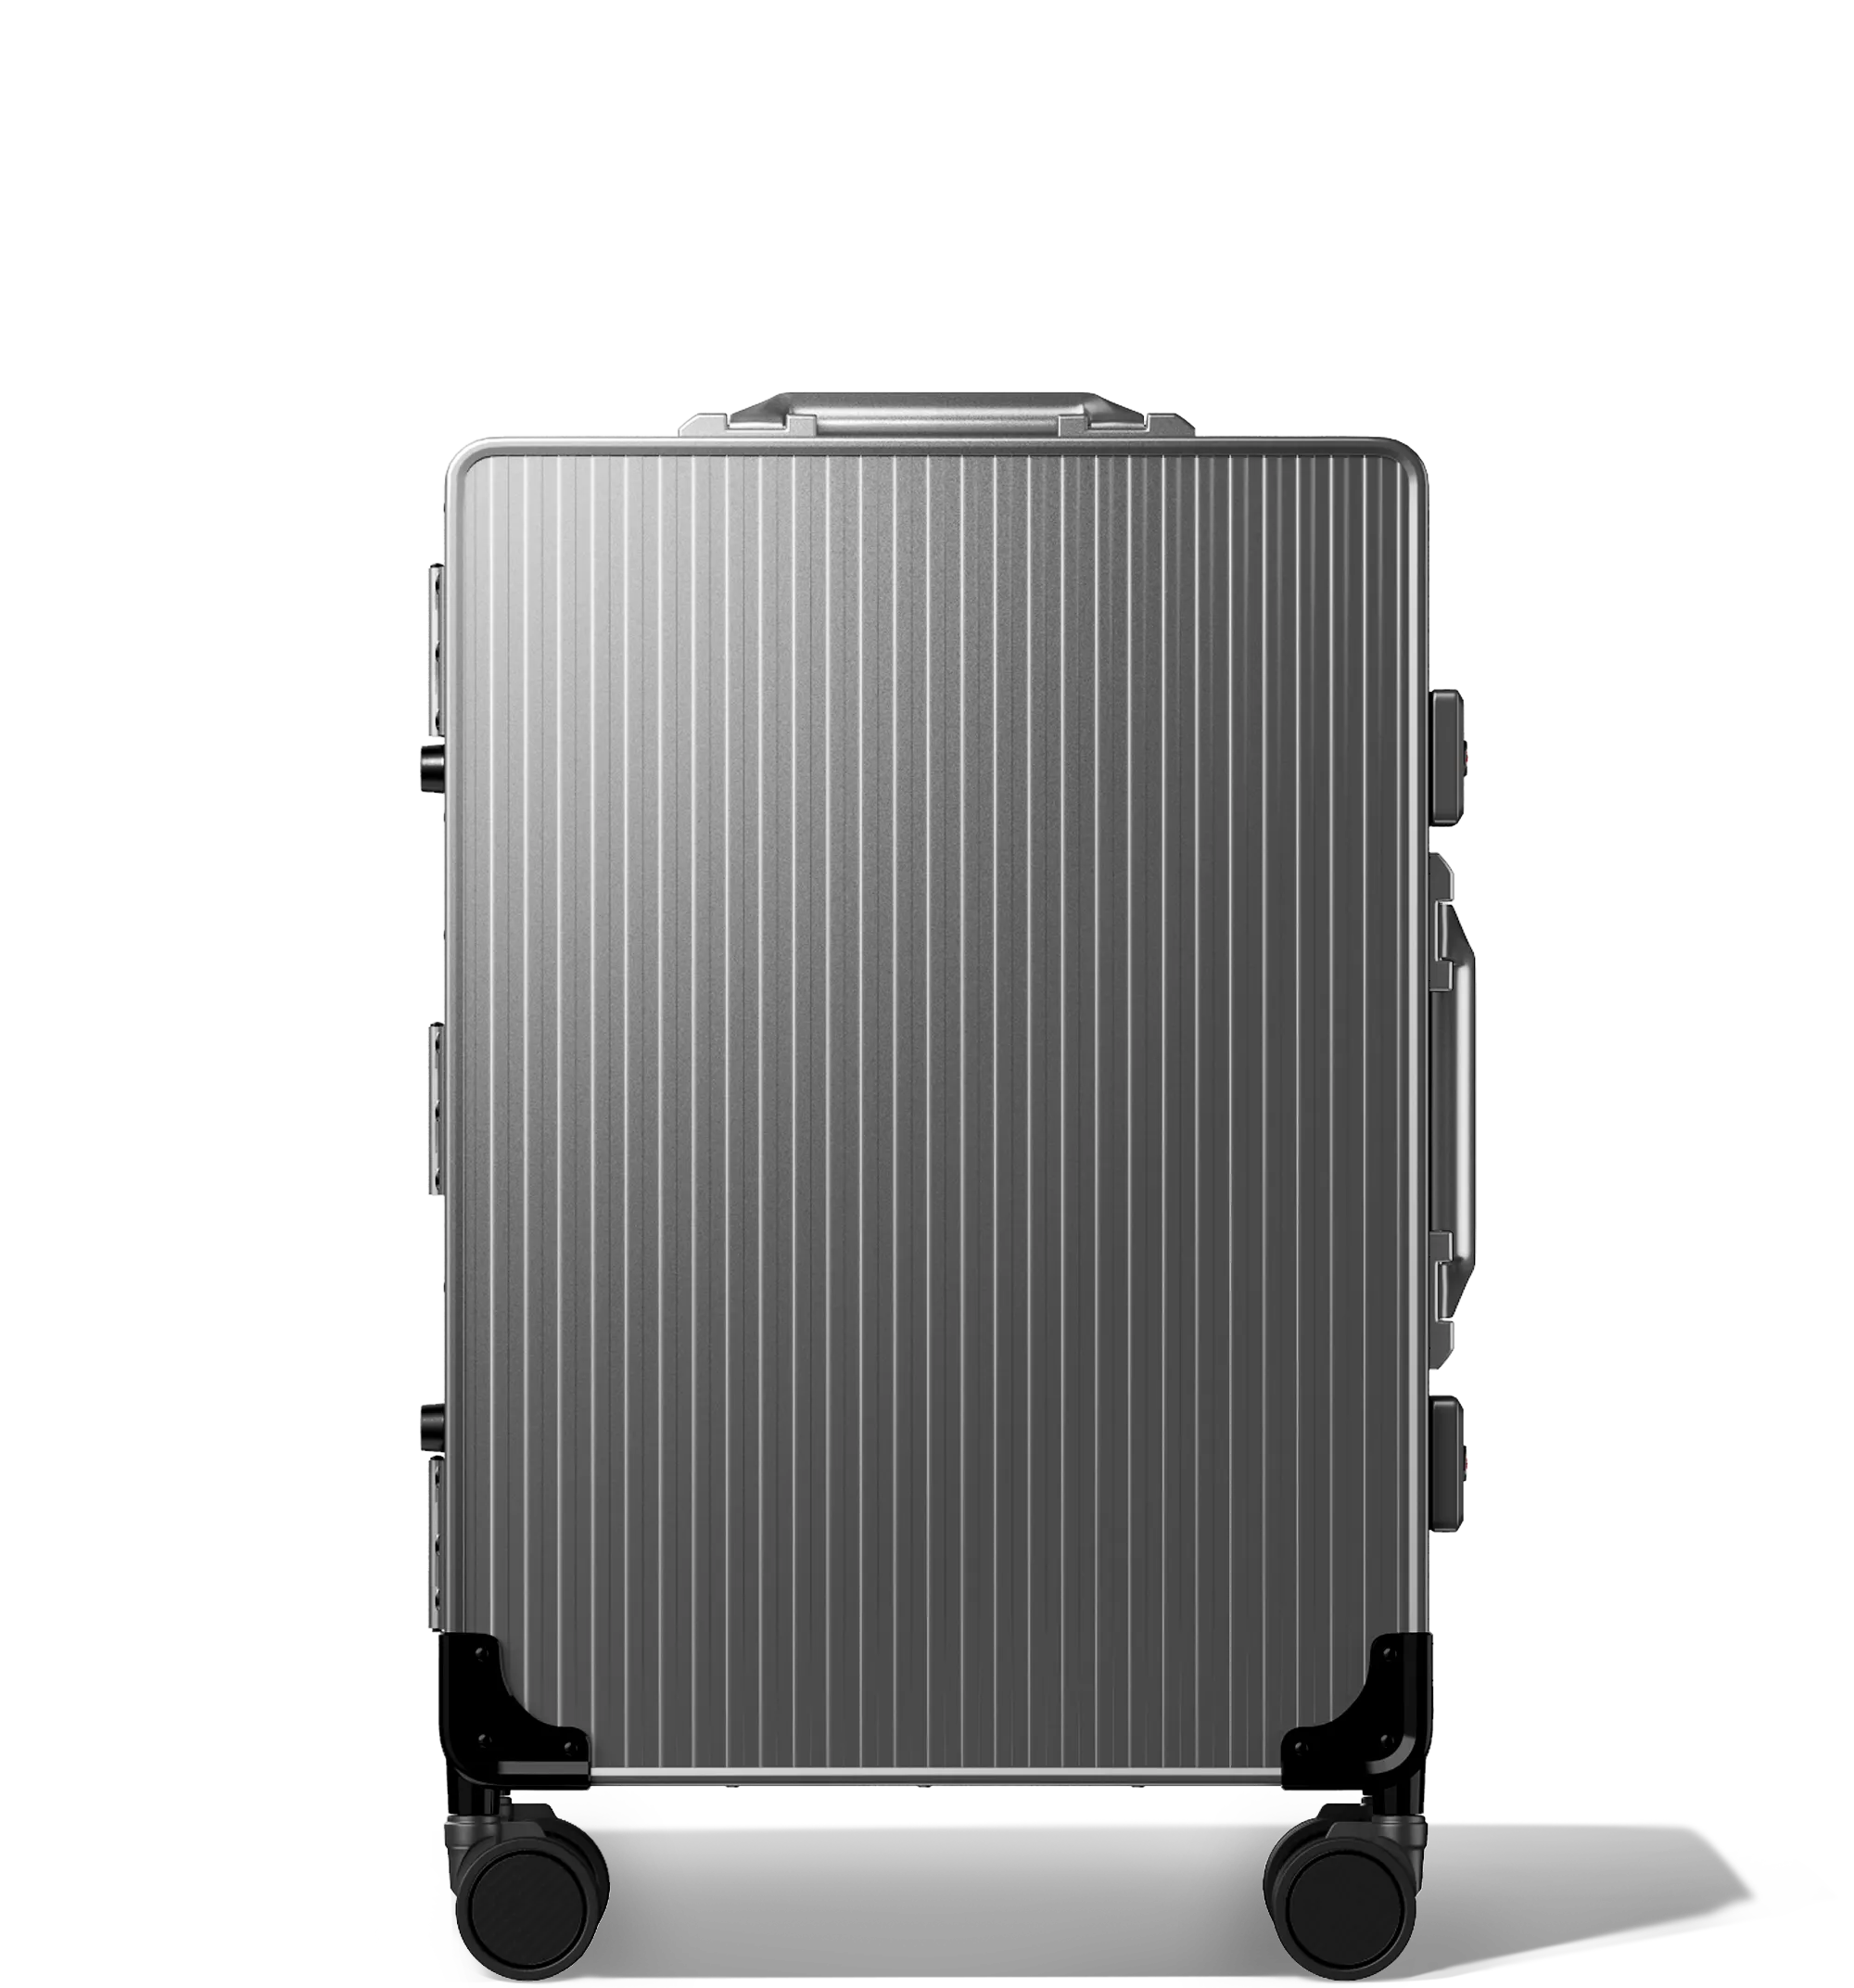 A vertical image of a Cabin in 56/20 luggage , upright, Gun Metal hard-shell aluminium Luggage with a grooved surface design and multi-directional wheels, shown against a white background.